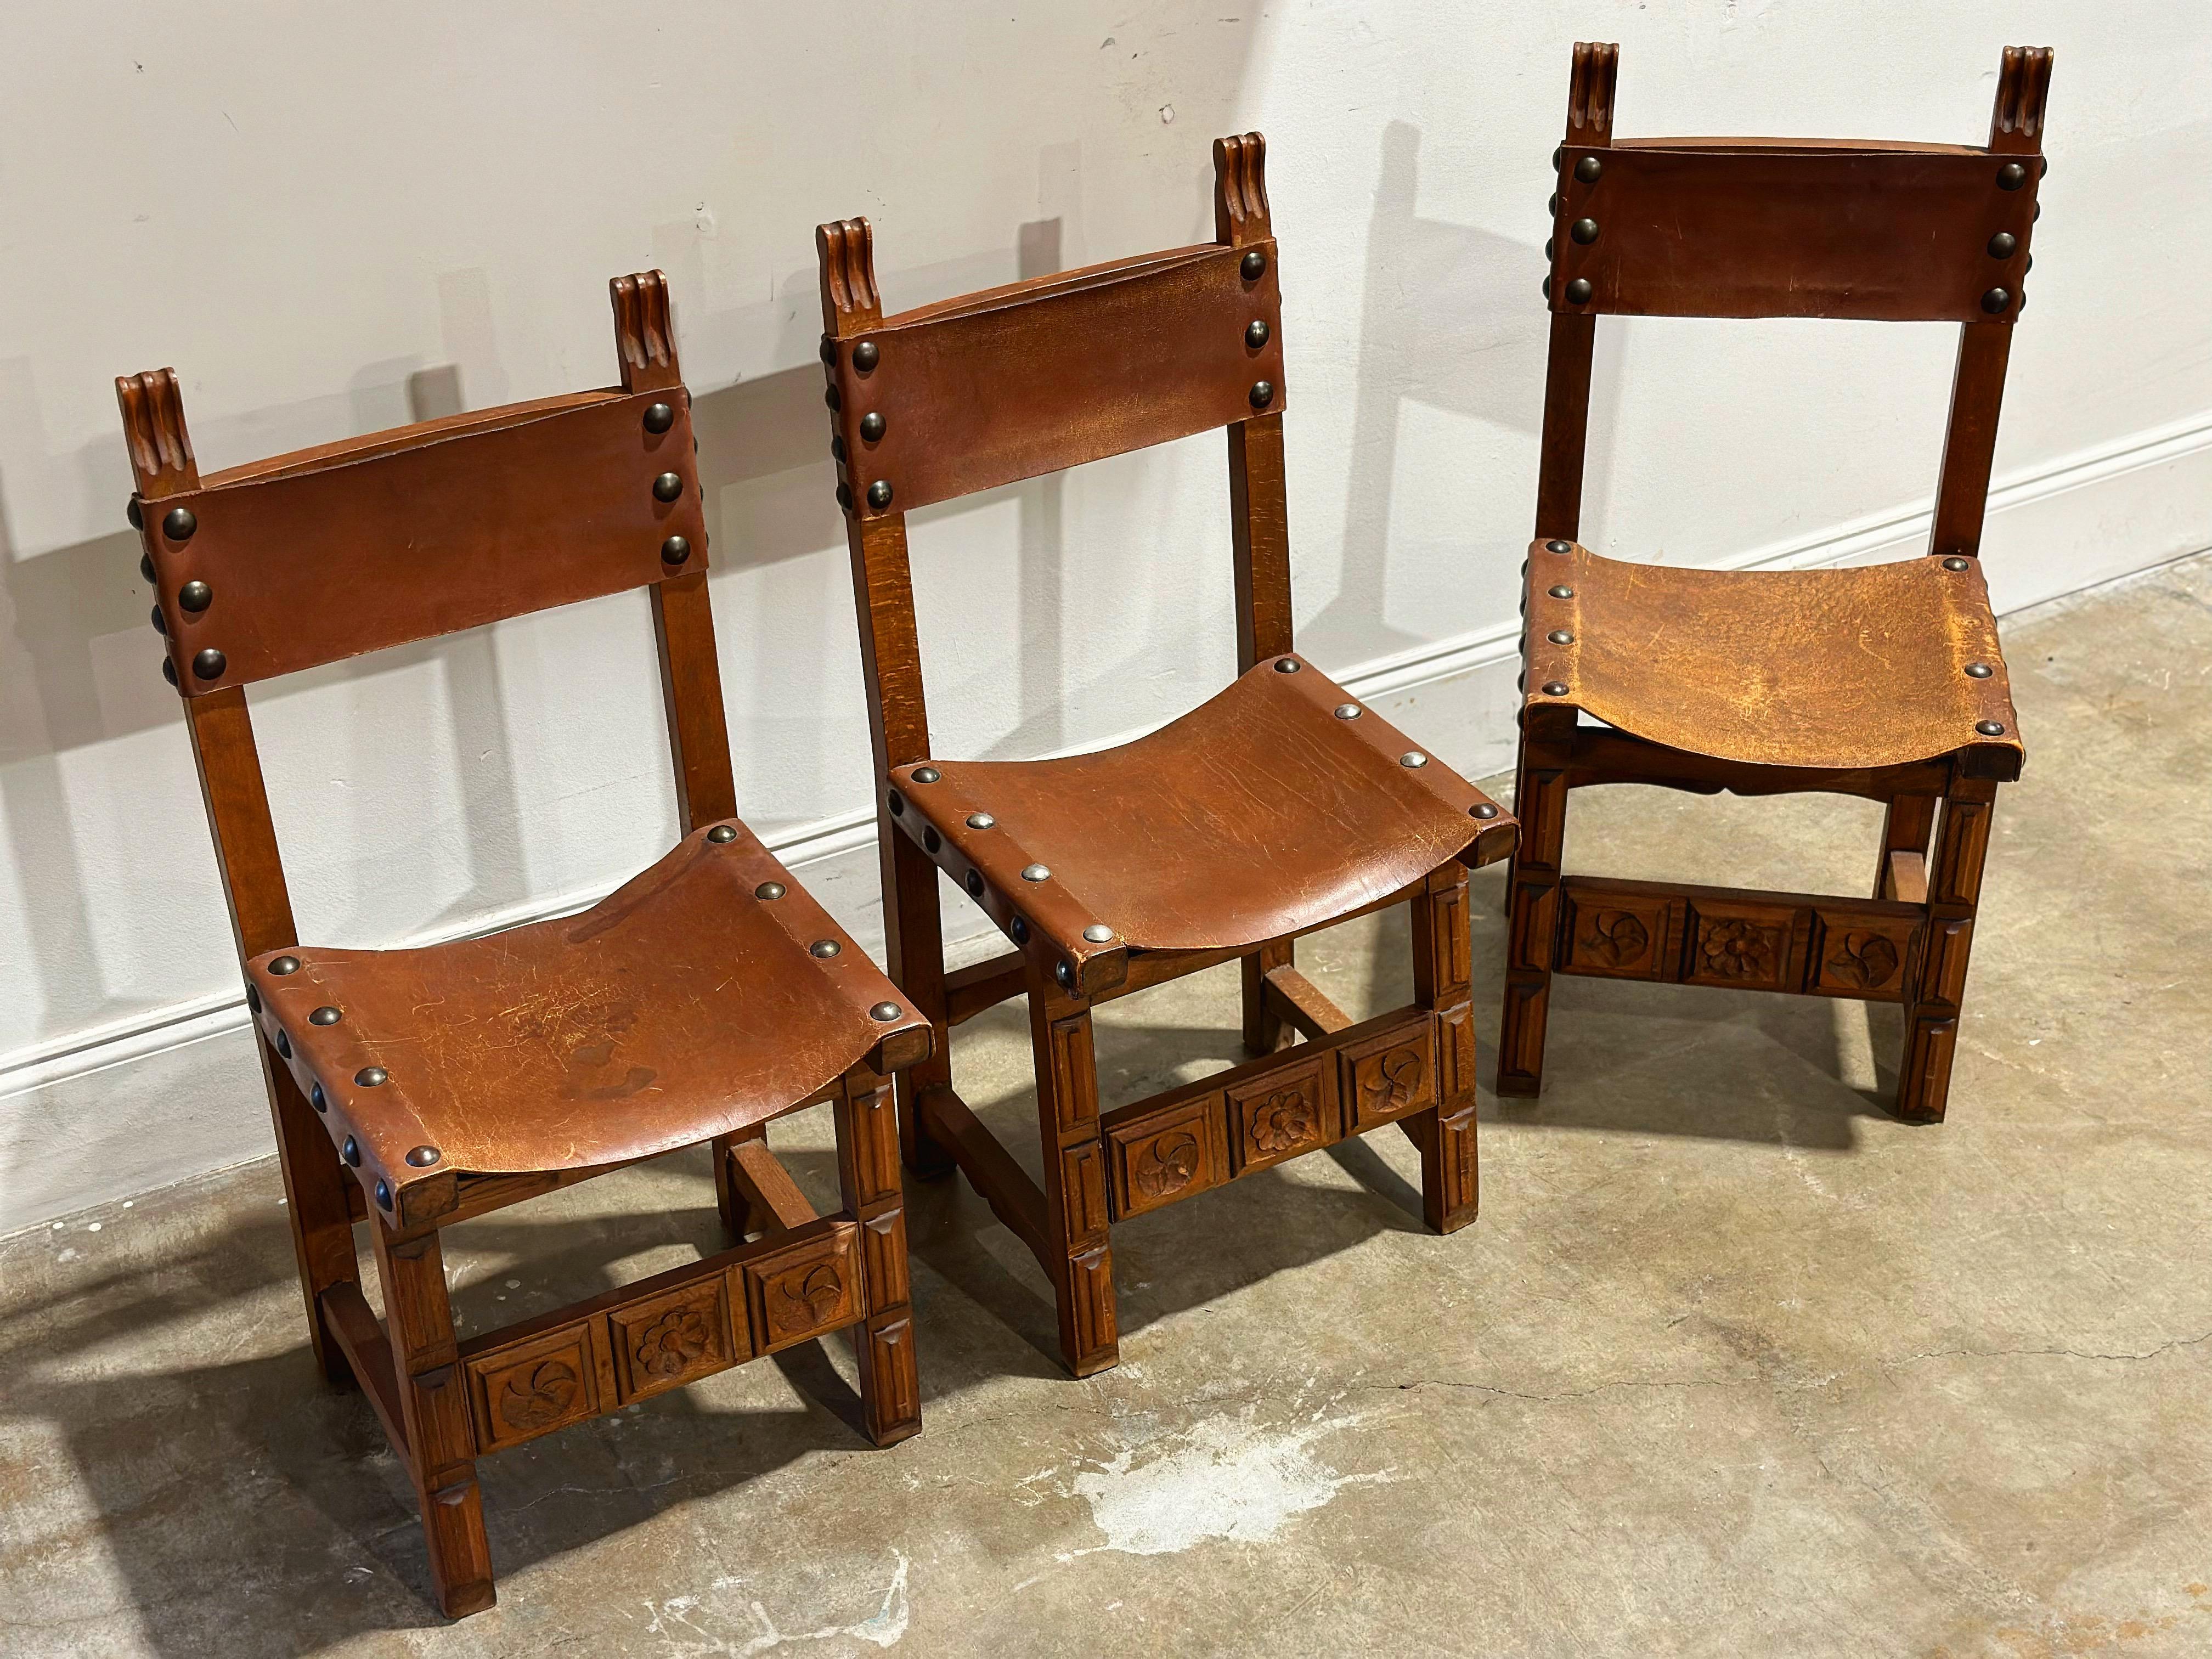 Colonial Revival Vintage Spainish Revival Carved Oak + Leather Dining Chairs - Set of Six For Sale